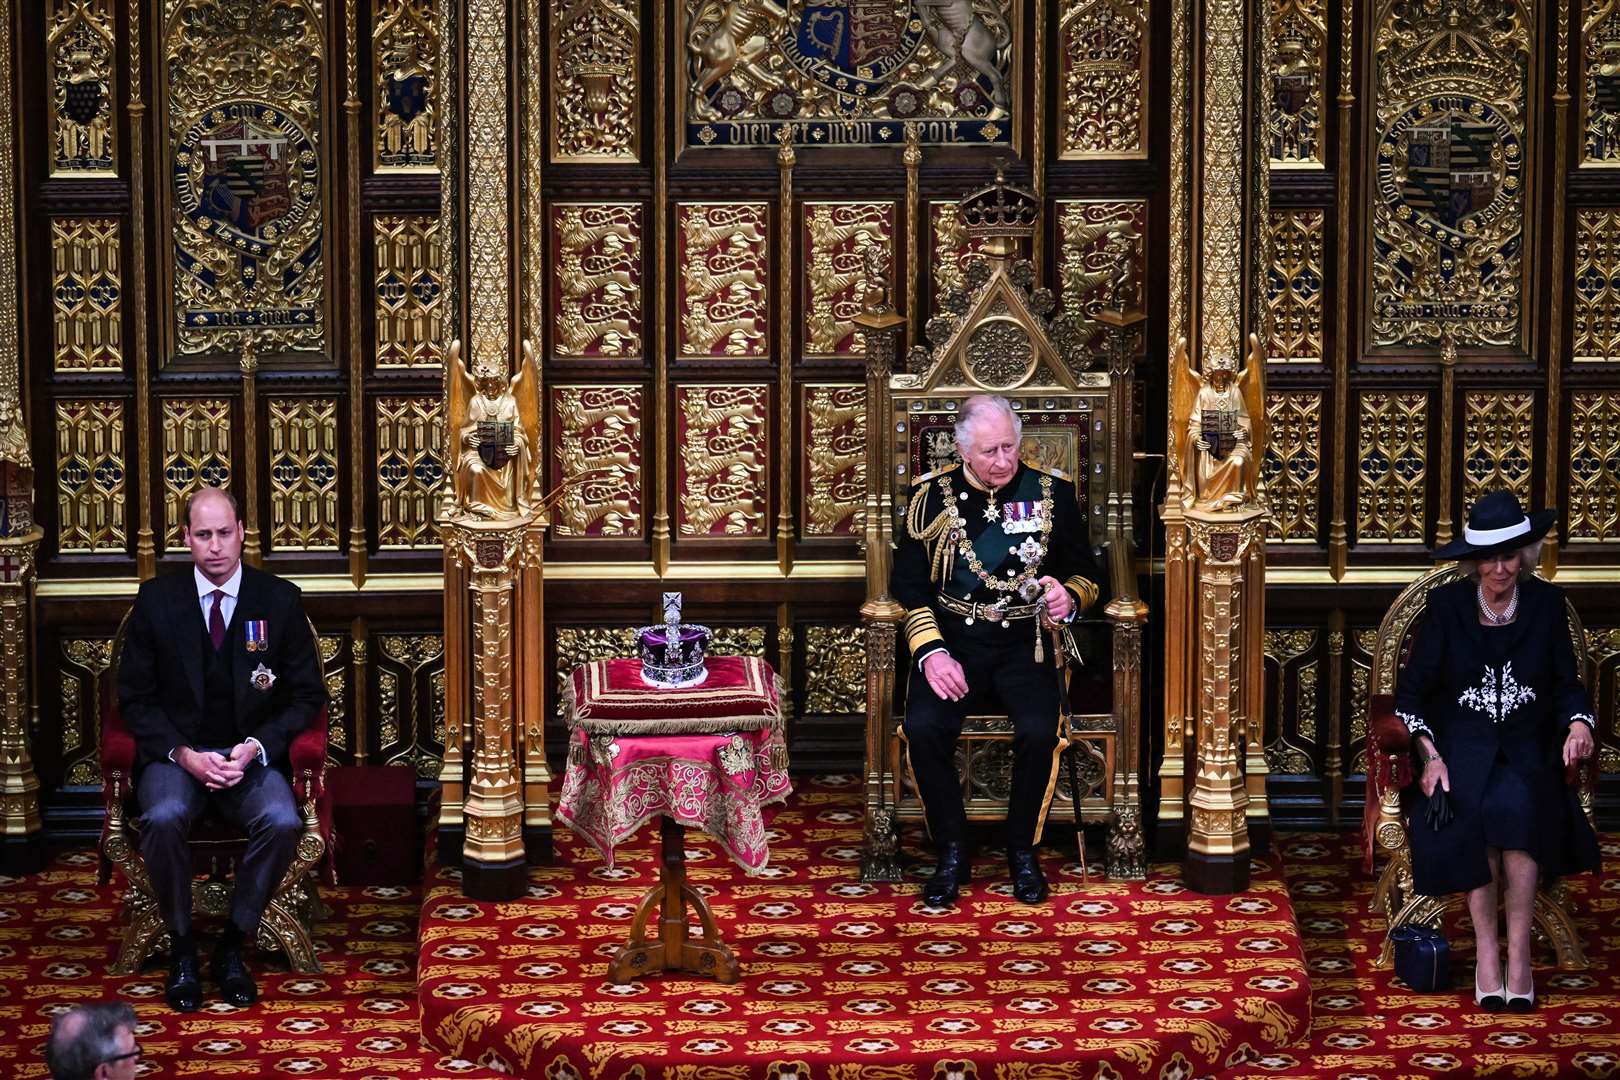 The Prince of Wales sits by the Imperial State Crown with the Duke of Cambridge on his right and the Duchess of Cornwall on his left during the State Opening of Parliament (Ben Stansall/PA)